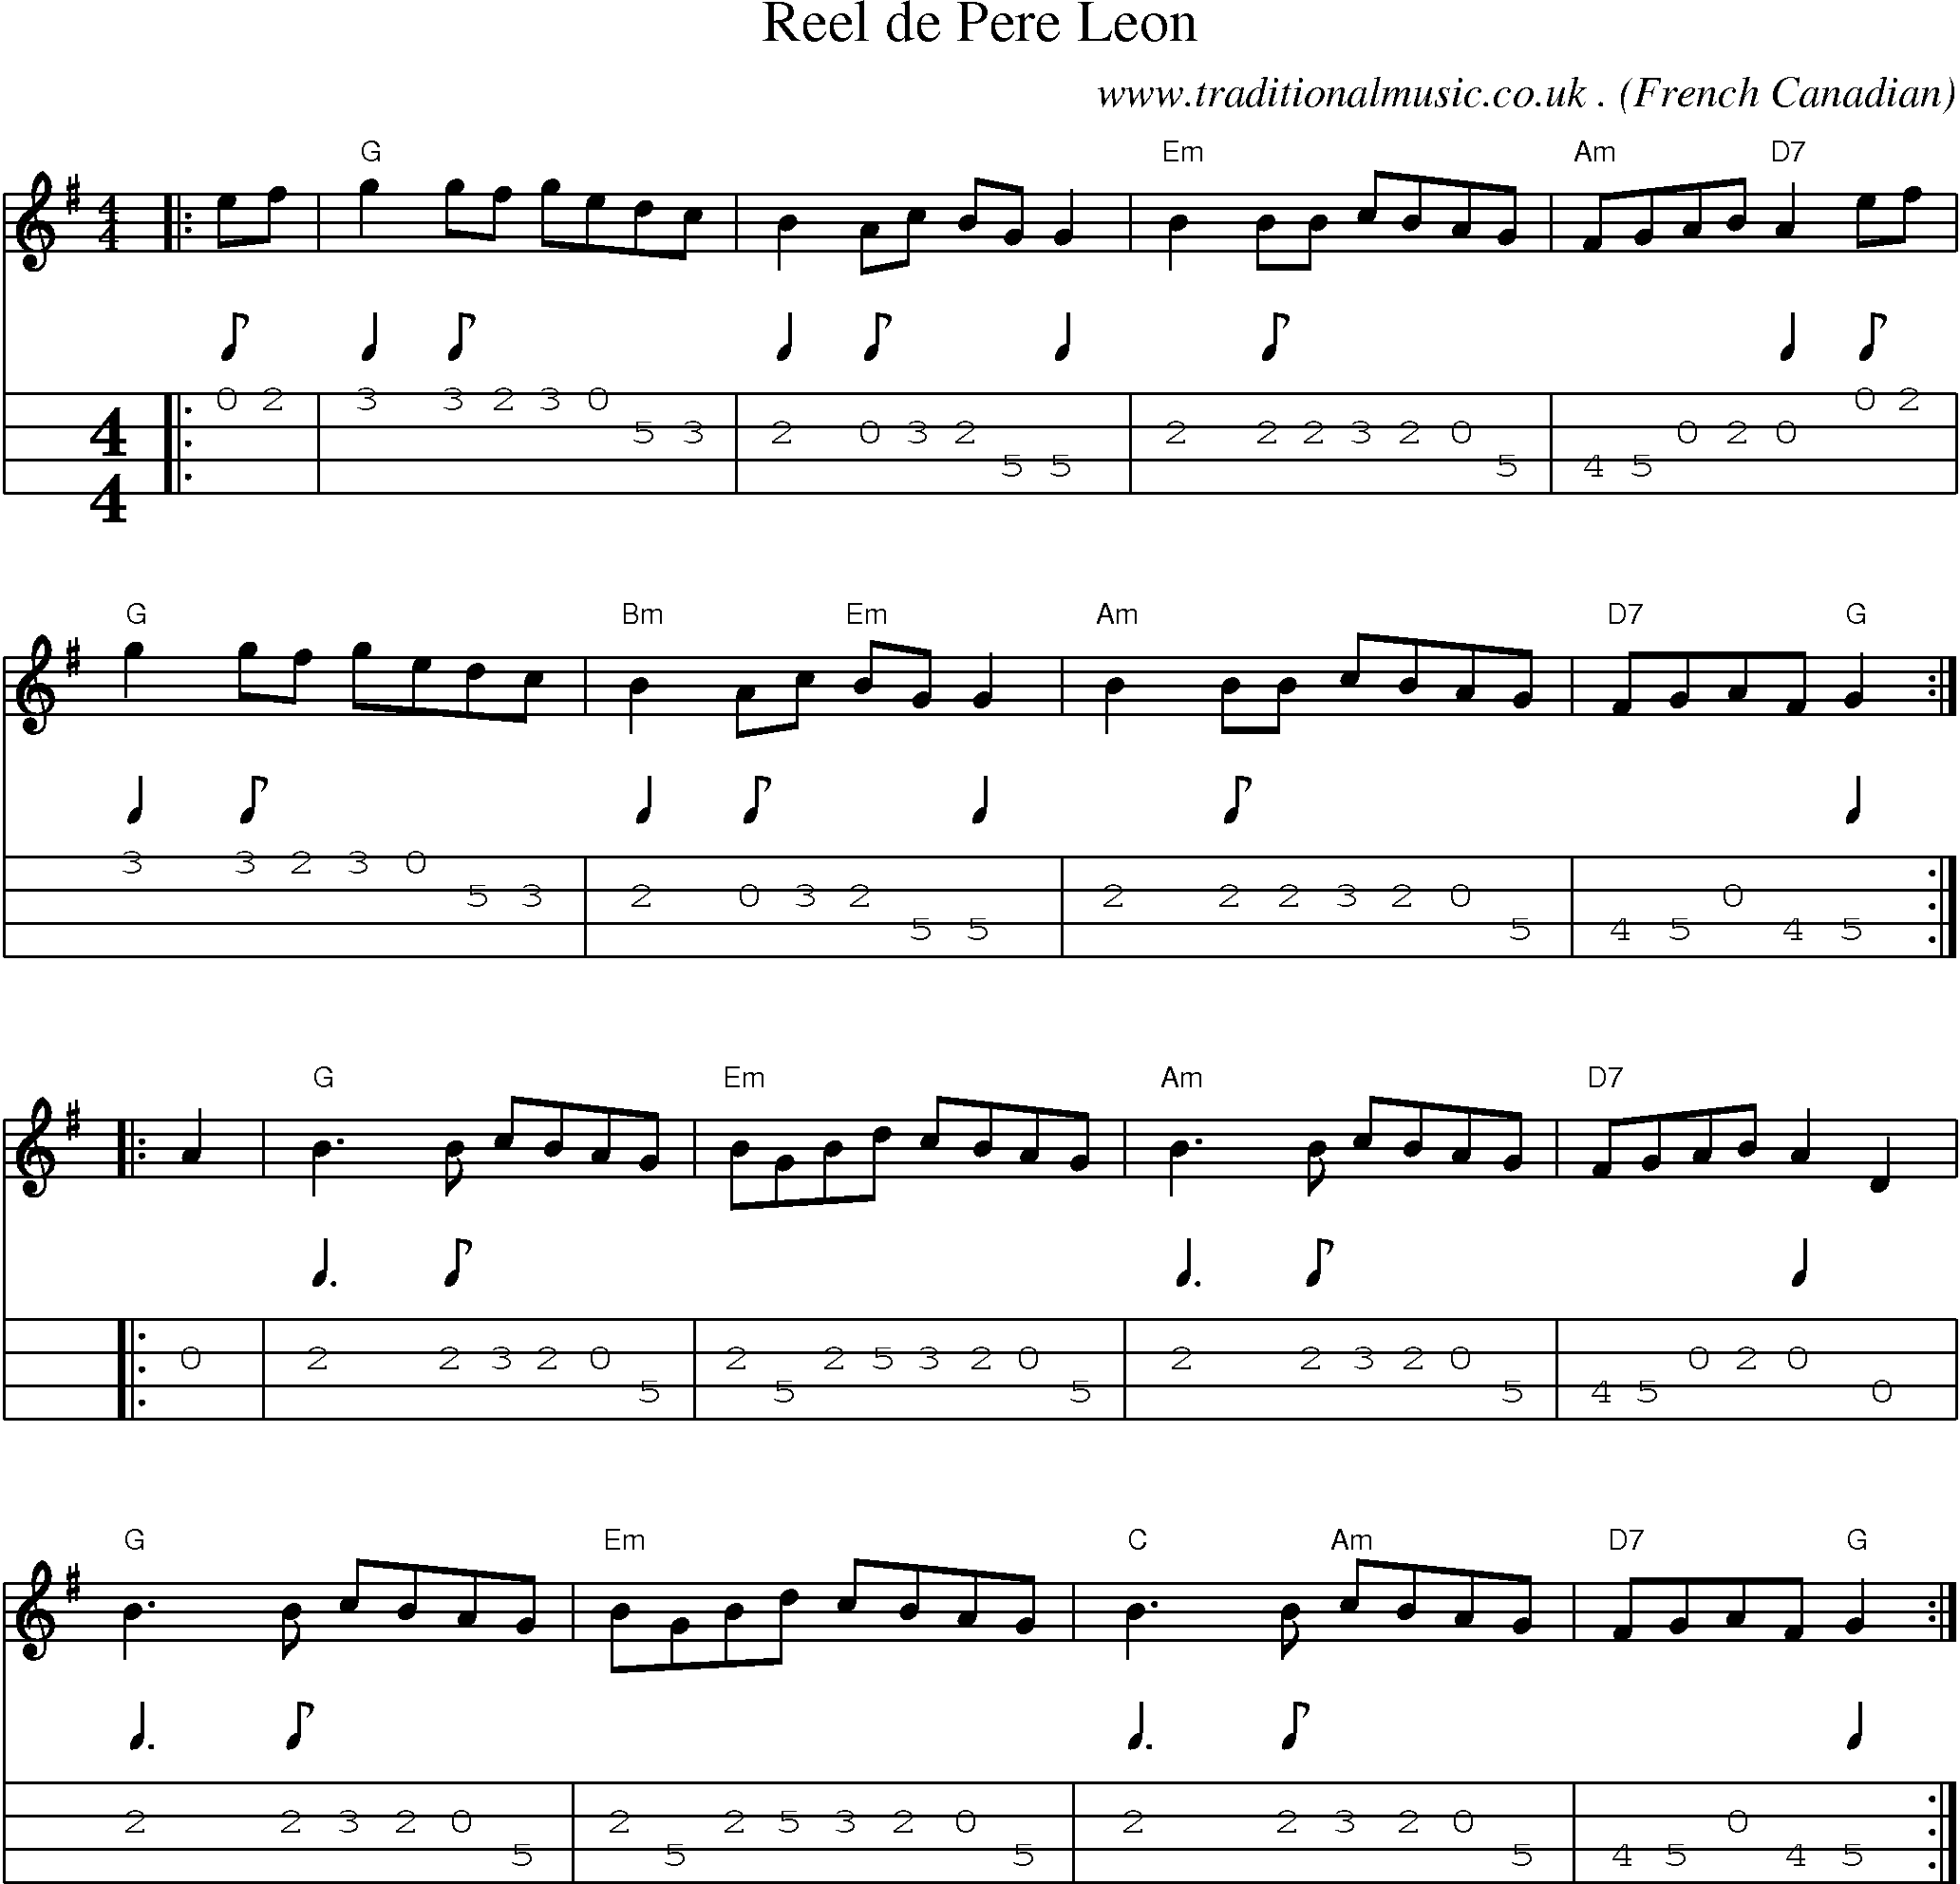 Music Score and Guitar Tabs for Reel De Pere Leon